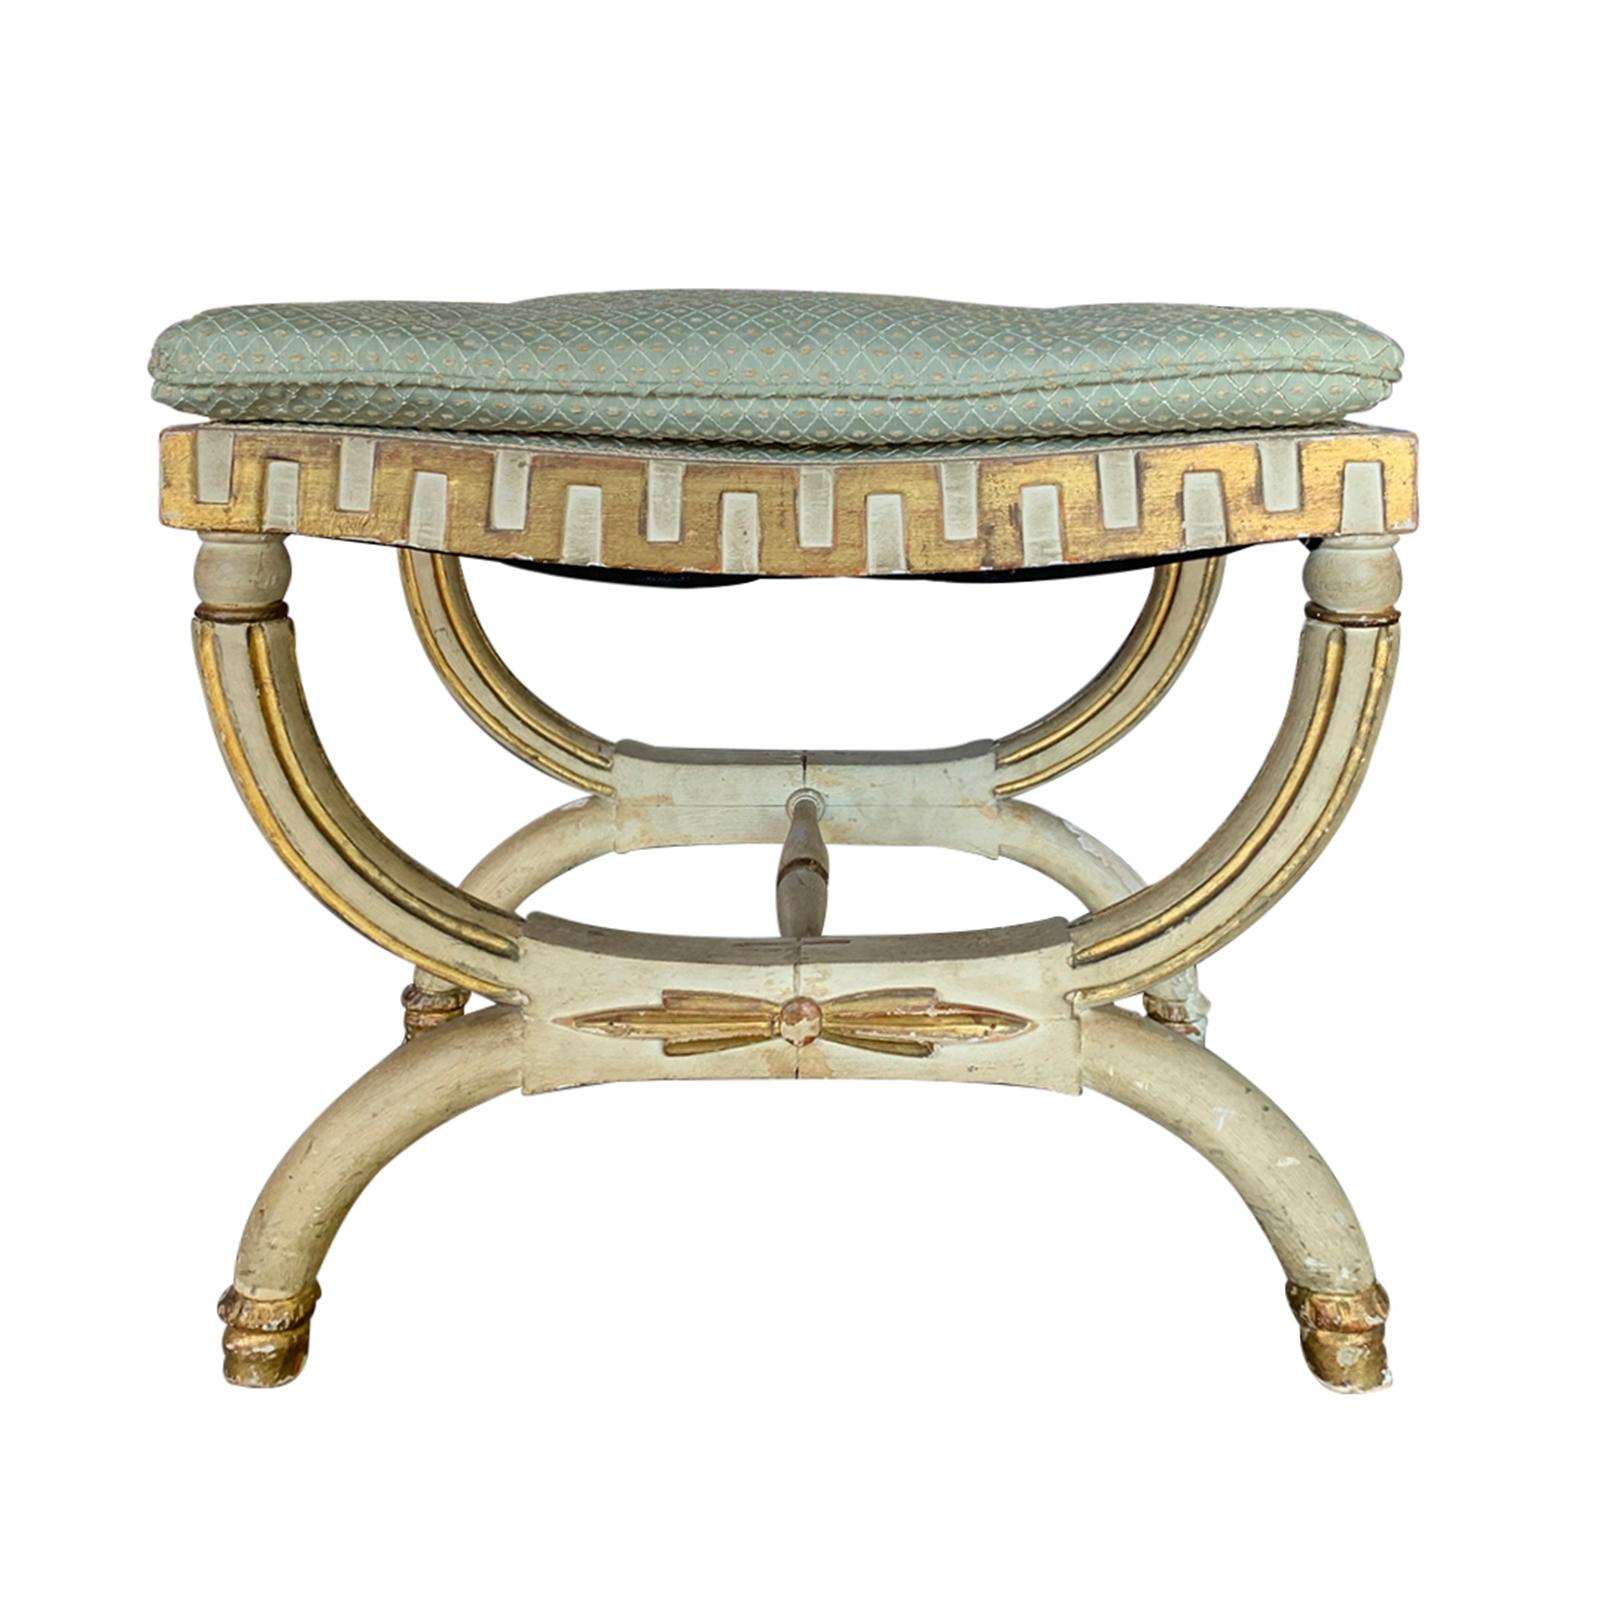 20th Century Neoclassical Painted Bench Stool with Greek Key and Gilt Details